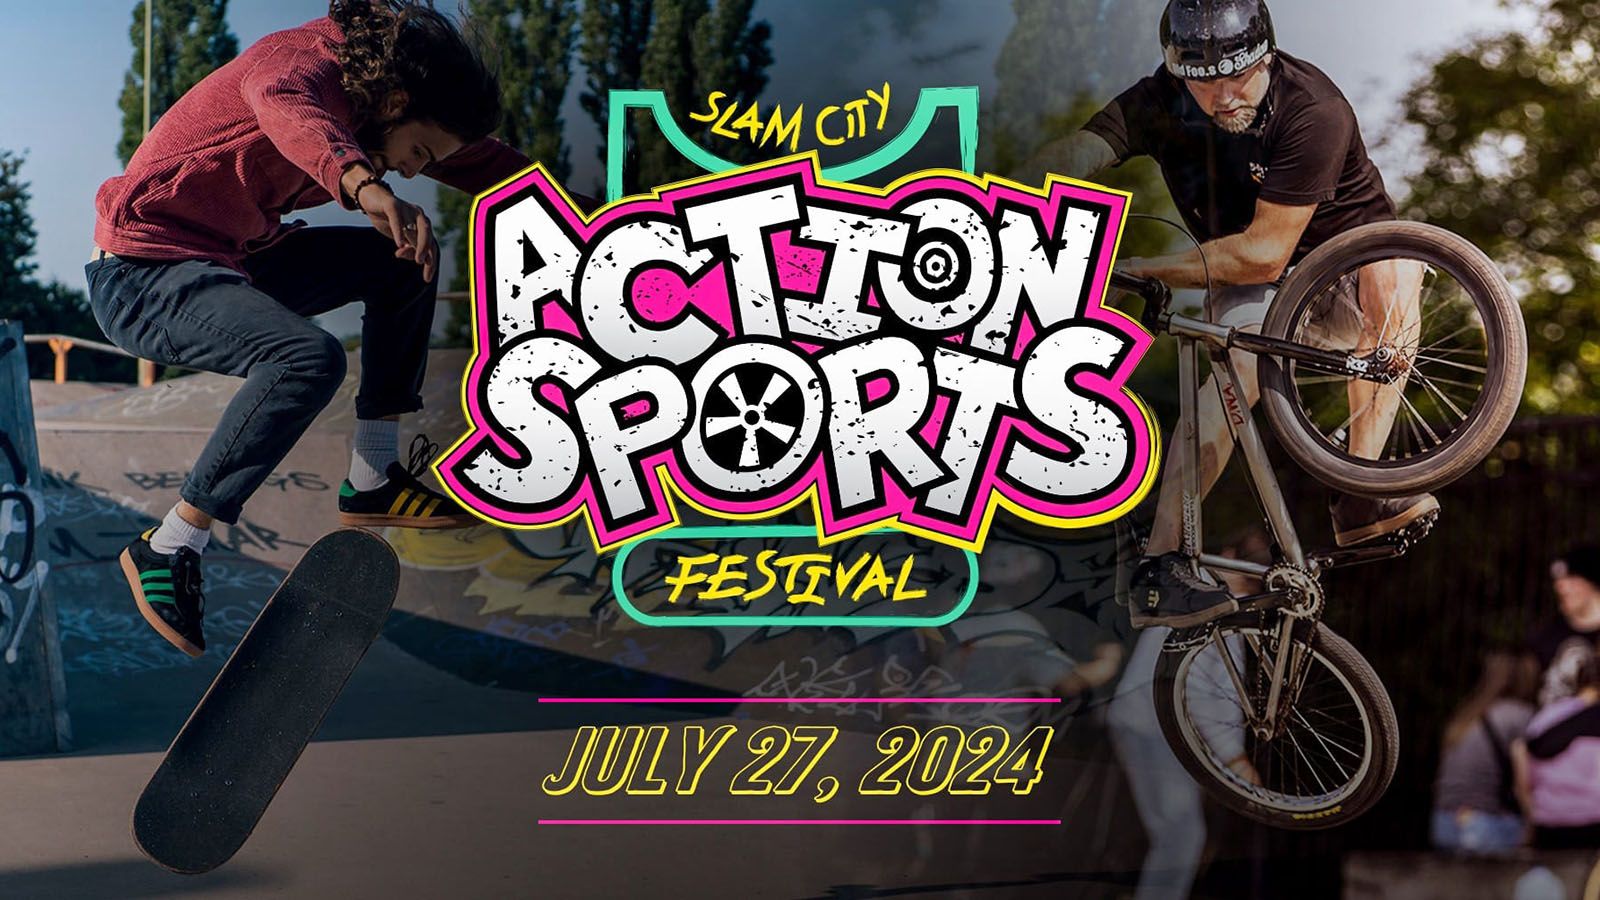 The Slam City Action Sports Festival will be Saturday, July 27, at Lawton Park.